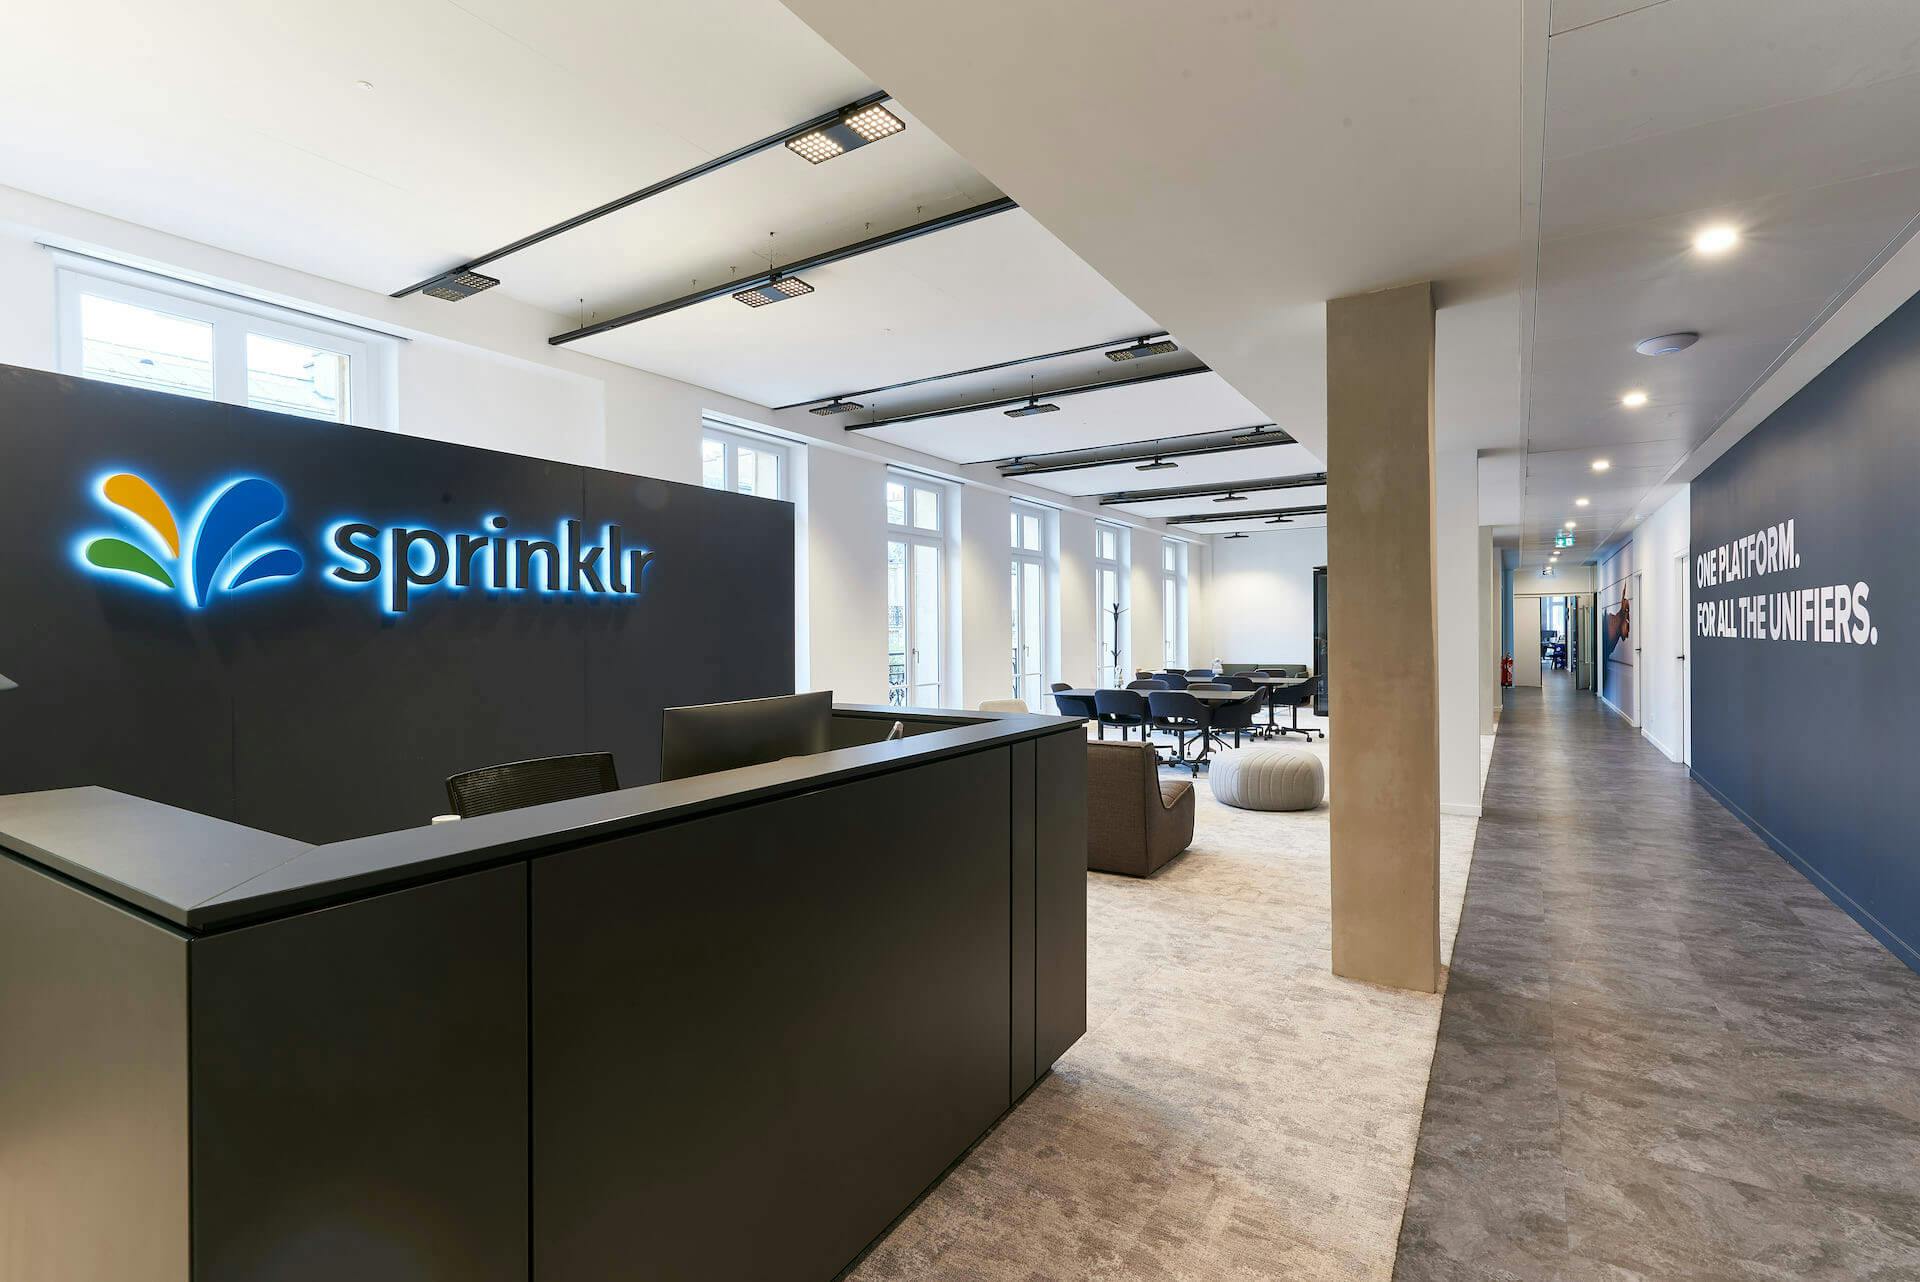 Sprinklr shares its experience with Deskeo